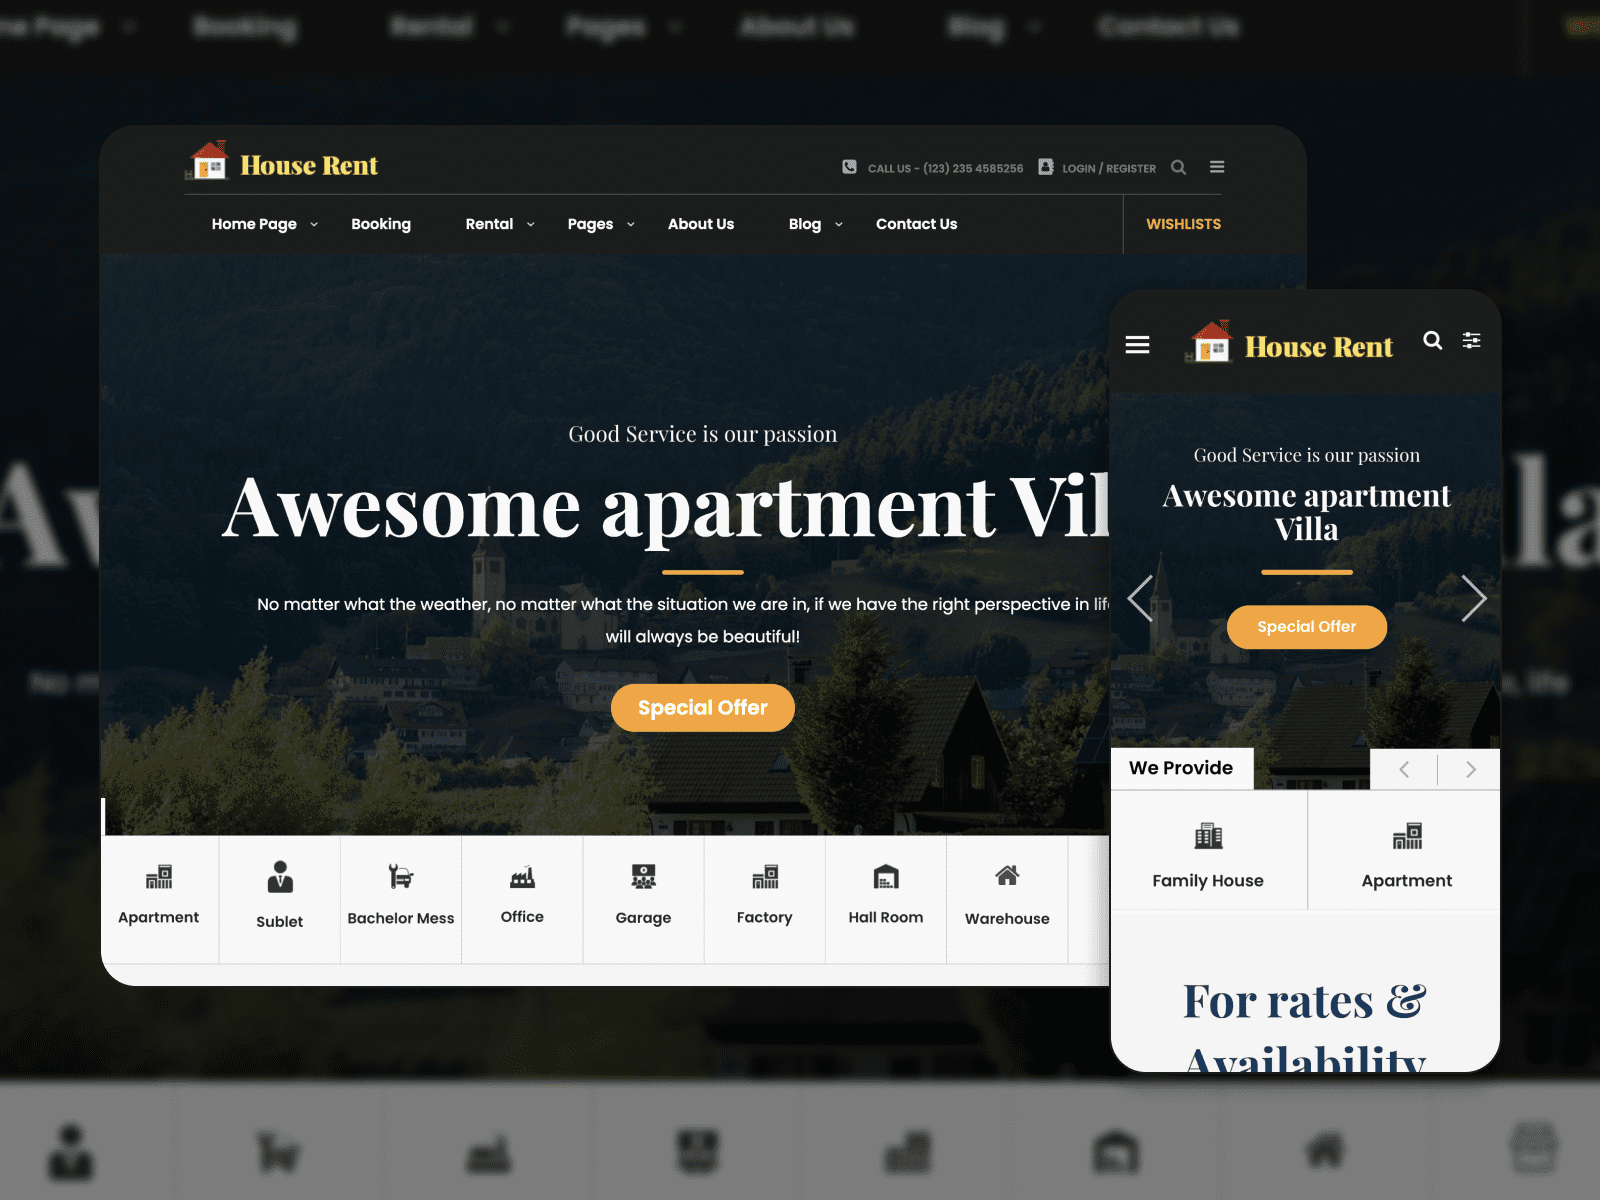 The Houserent WP theme.